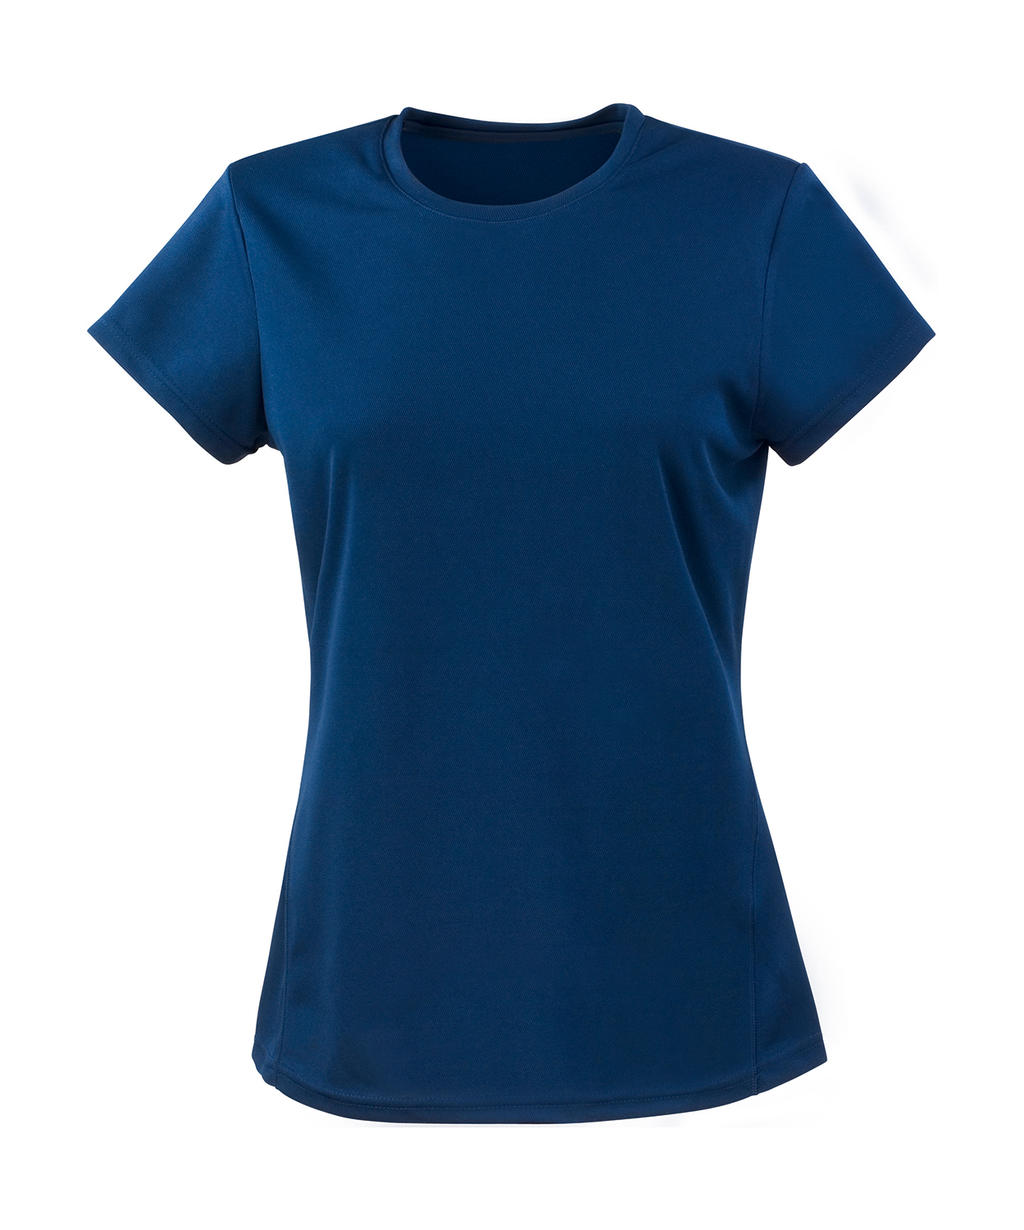  Ladies Performance T-Shirt in Farbe Navy